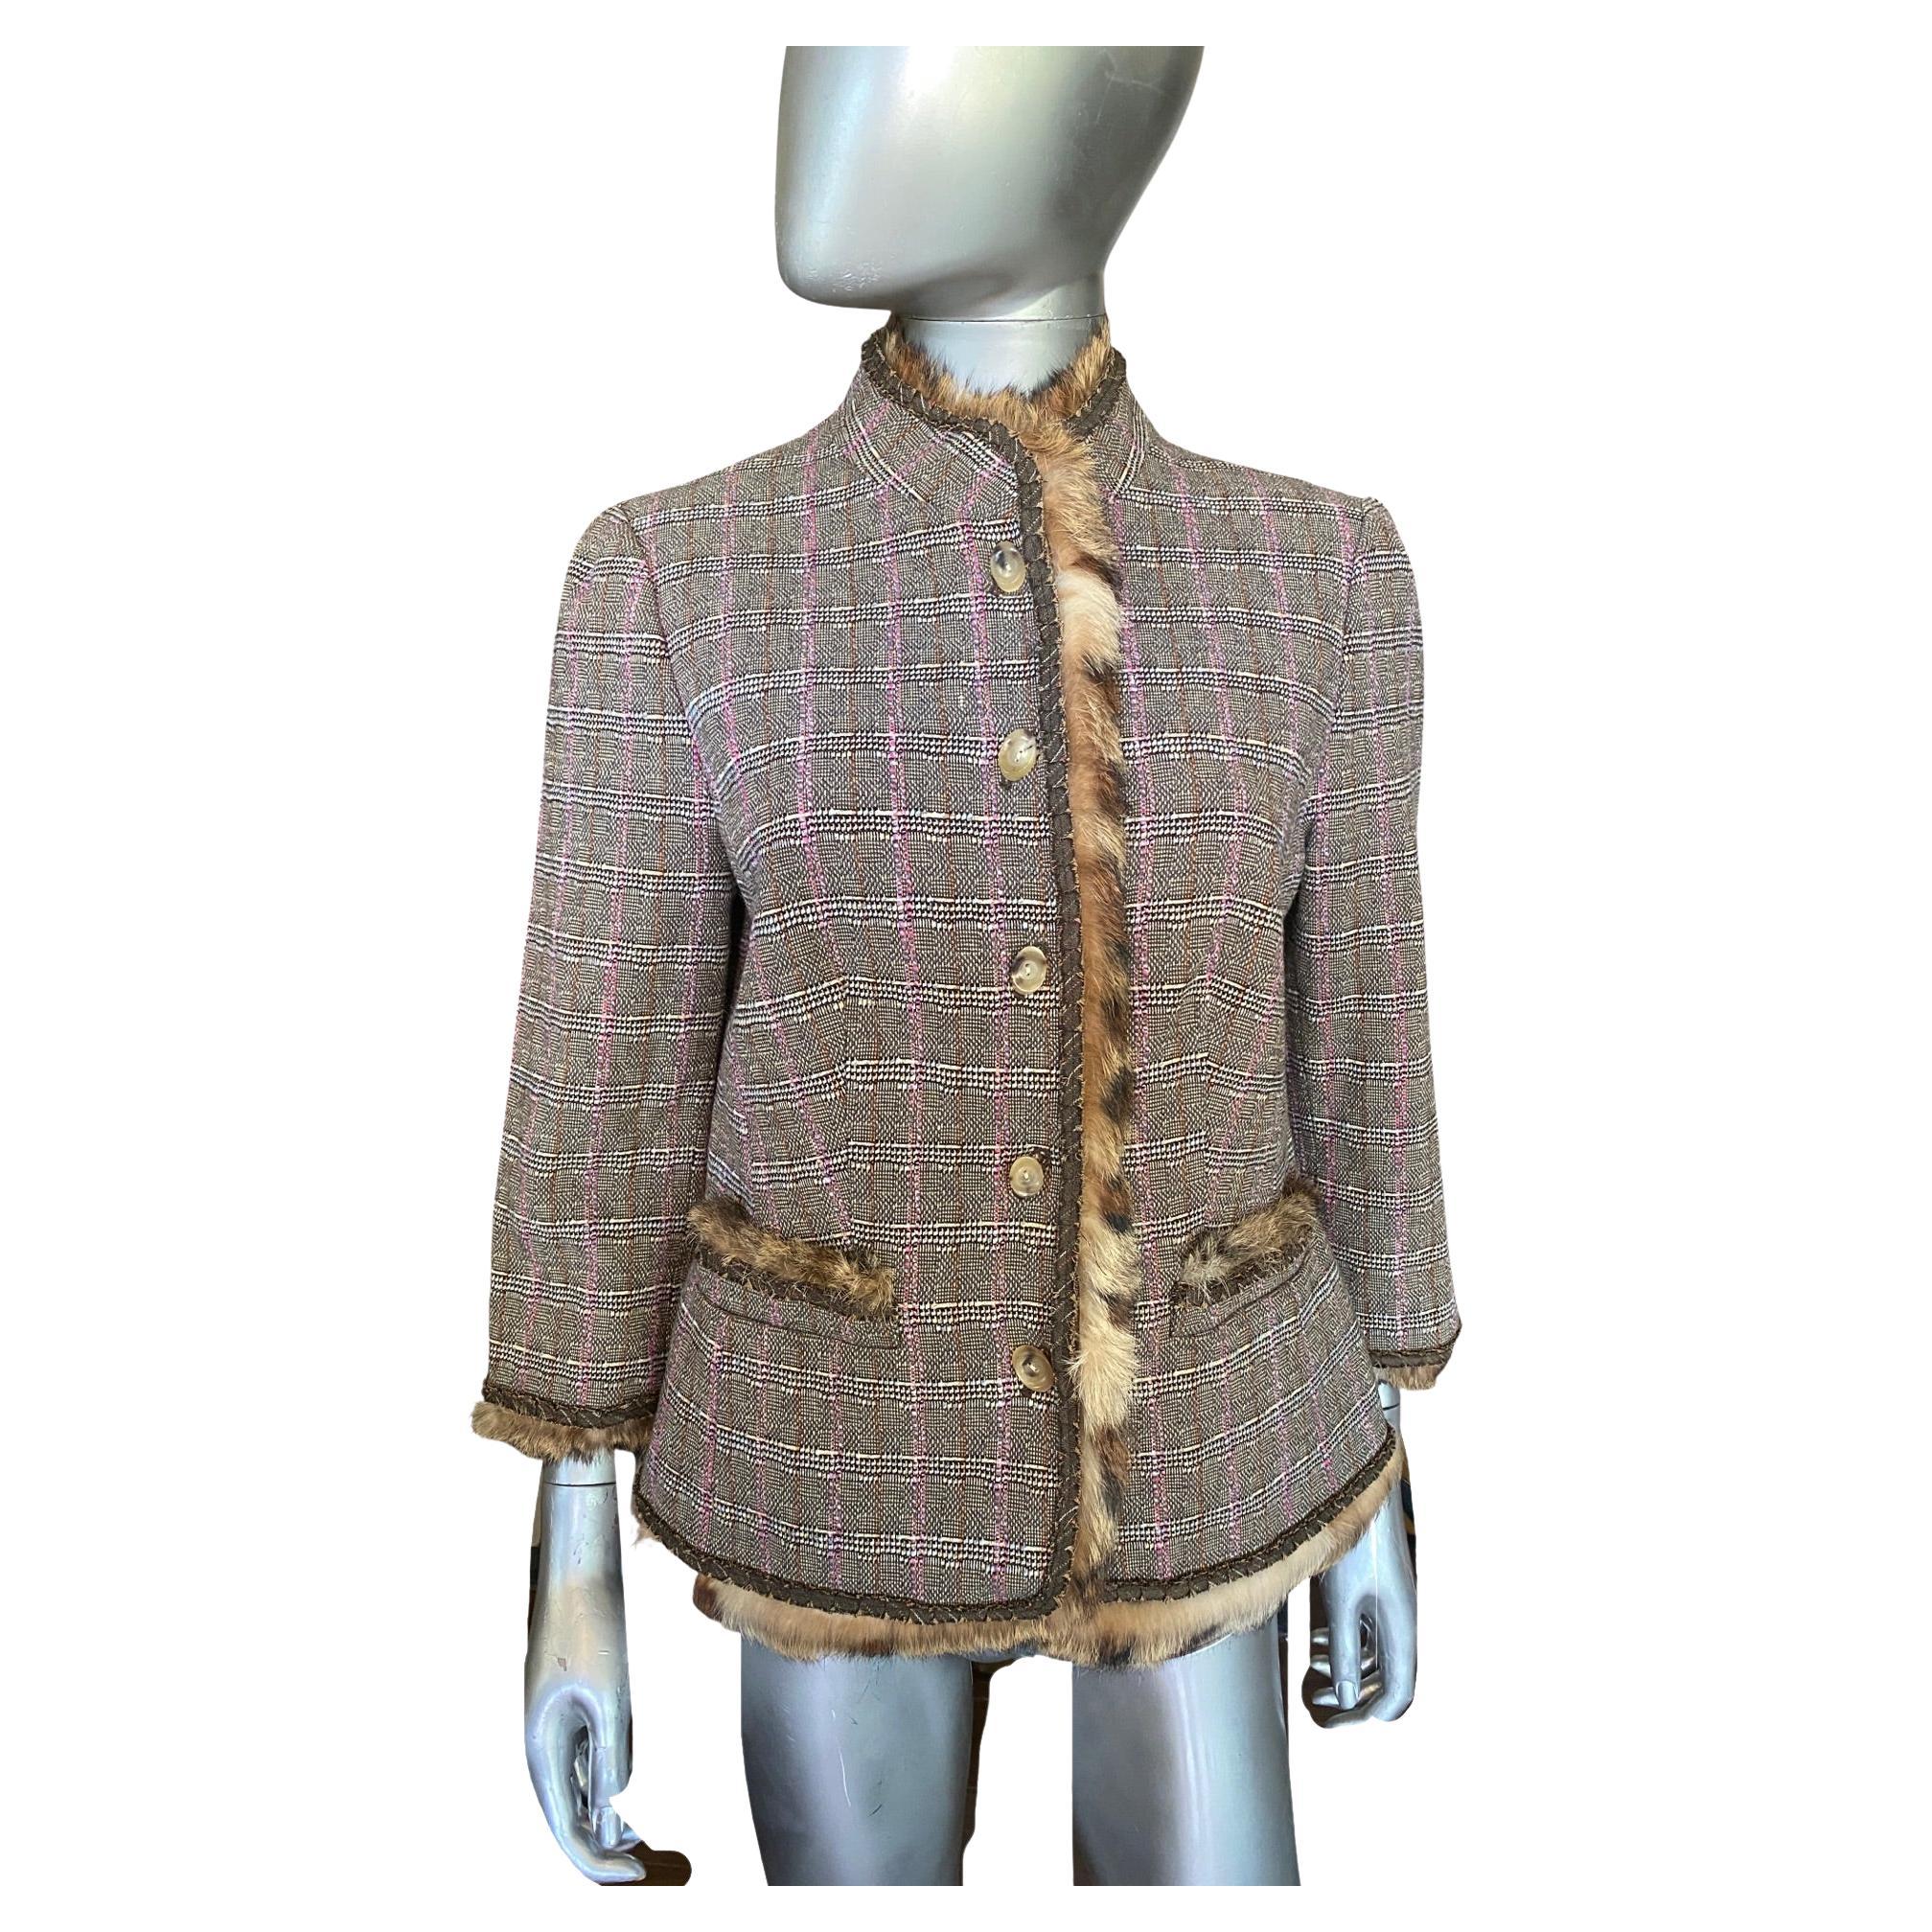 Another chic suit designed by Worth New York. This wool (blend) plaid is modern. Brown based, it is crossed with lilac and rust color to form the plaid. A perfectly chic early fall jacket (size 12) beautifully made by Worth New York City. The wool